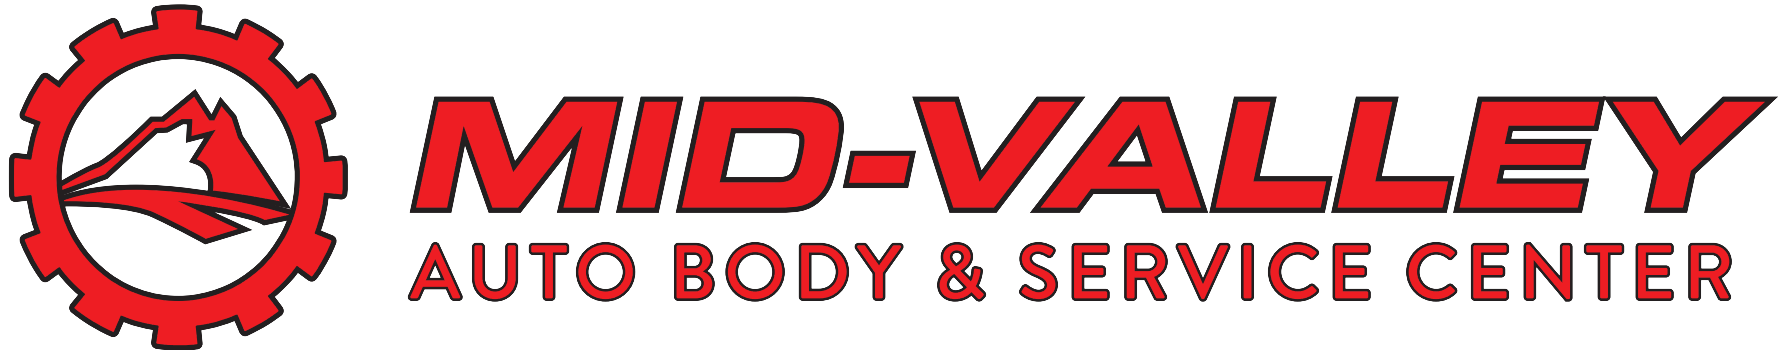 Mid-Valley auto body and service center logo